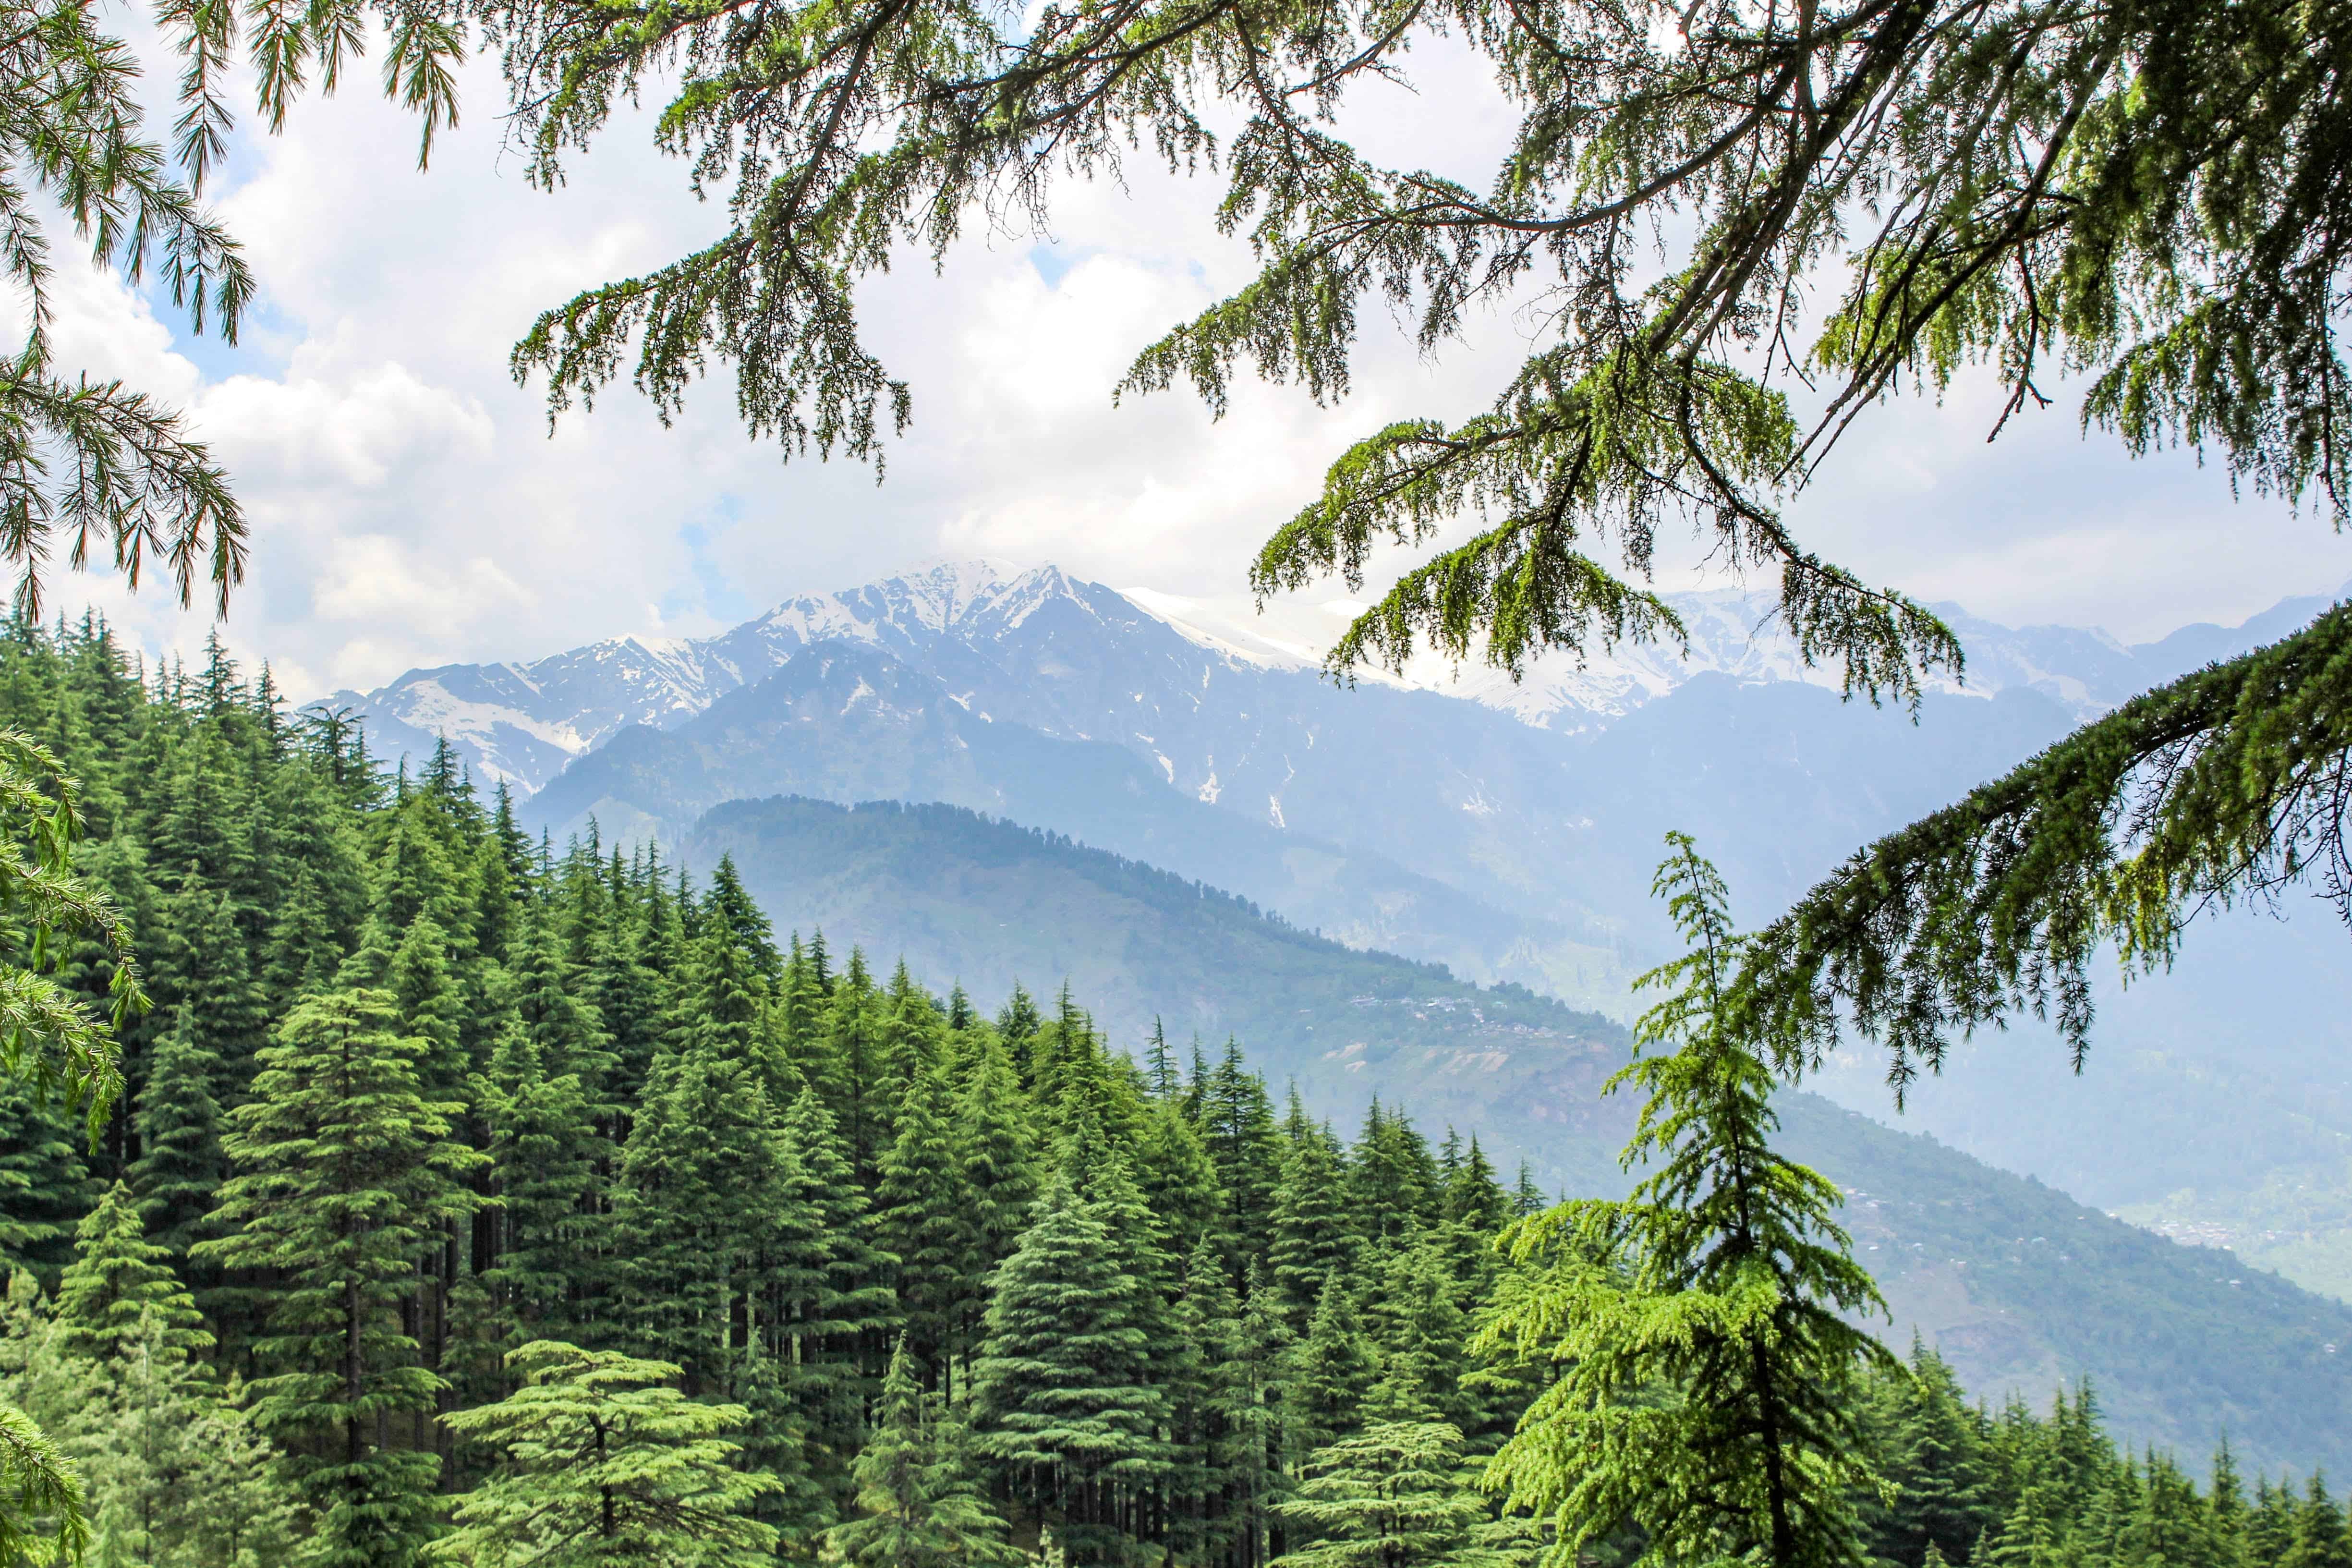 View of the forests and snow capped mountains in Manali